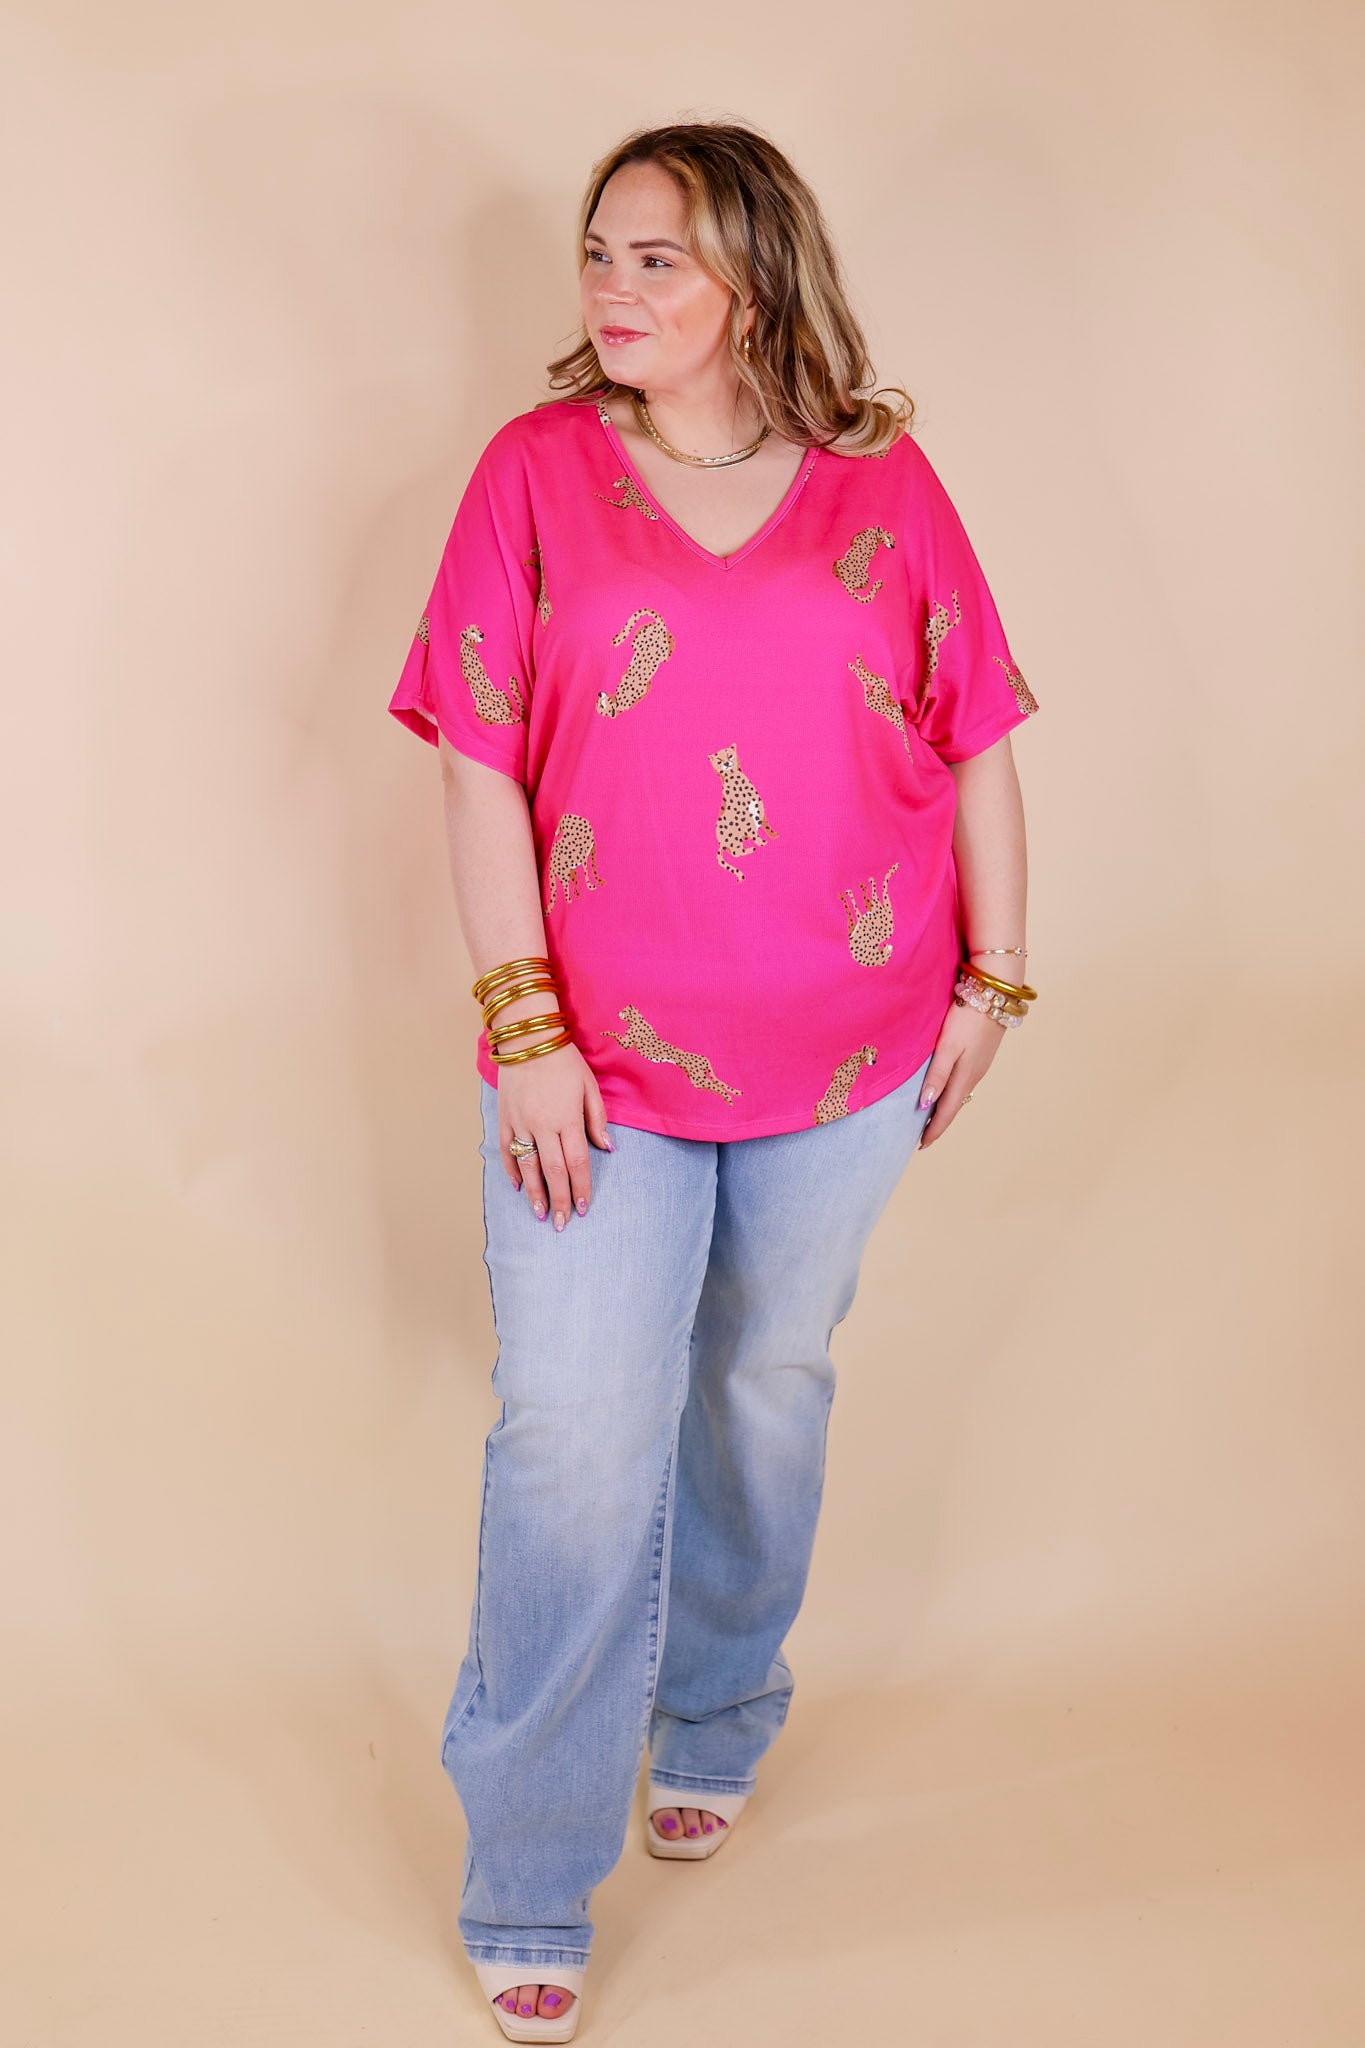 Wild Side Cheetah Print V Neck Top with Short Sleeves in Hot Pink - Giddy Up Glamour Boutique